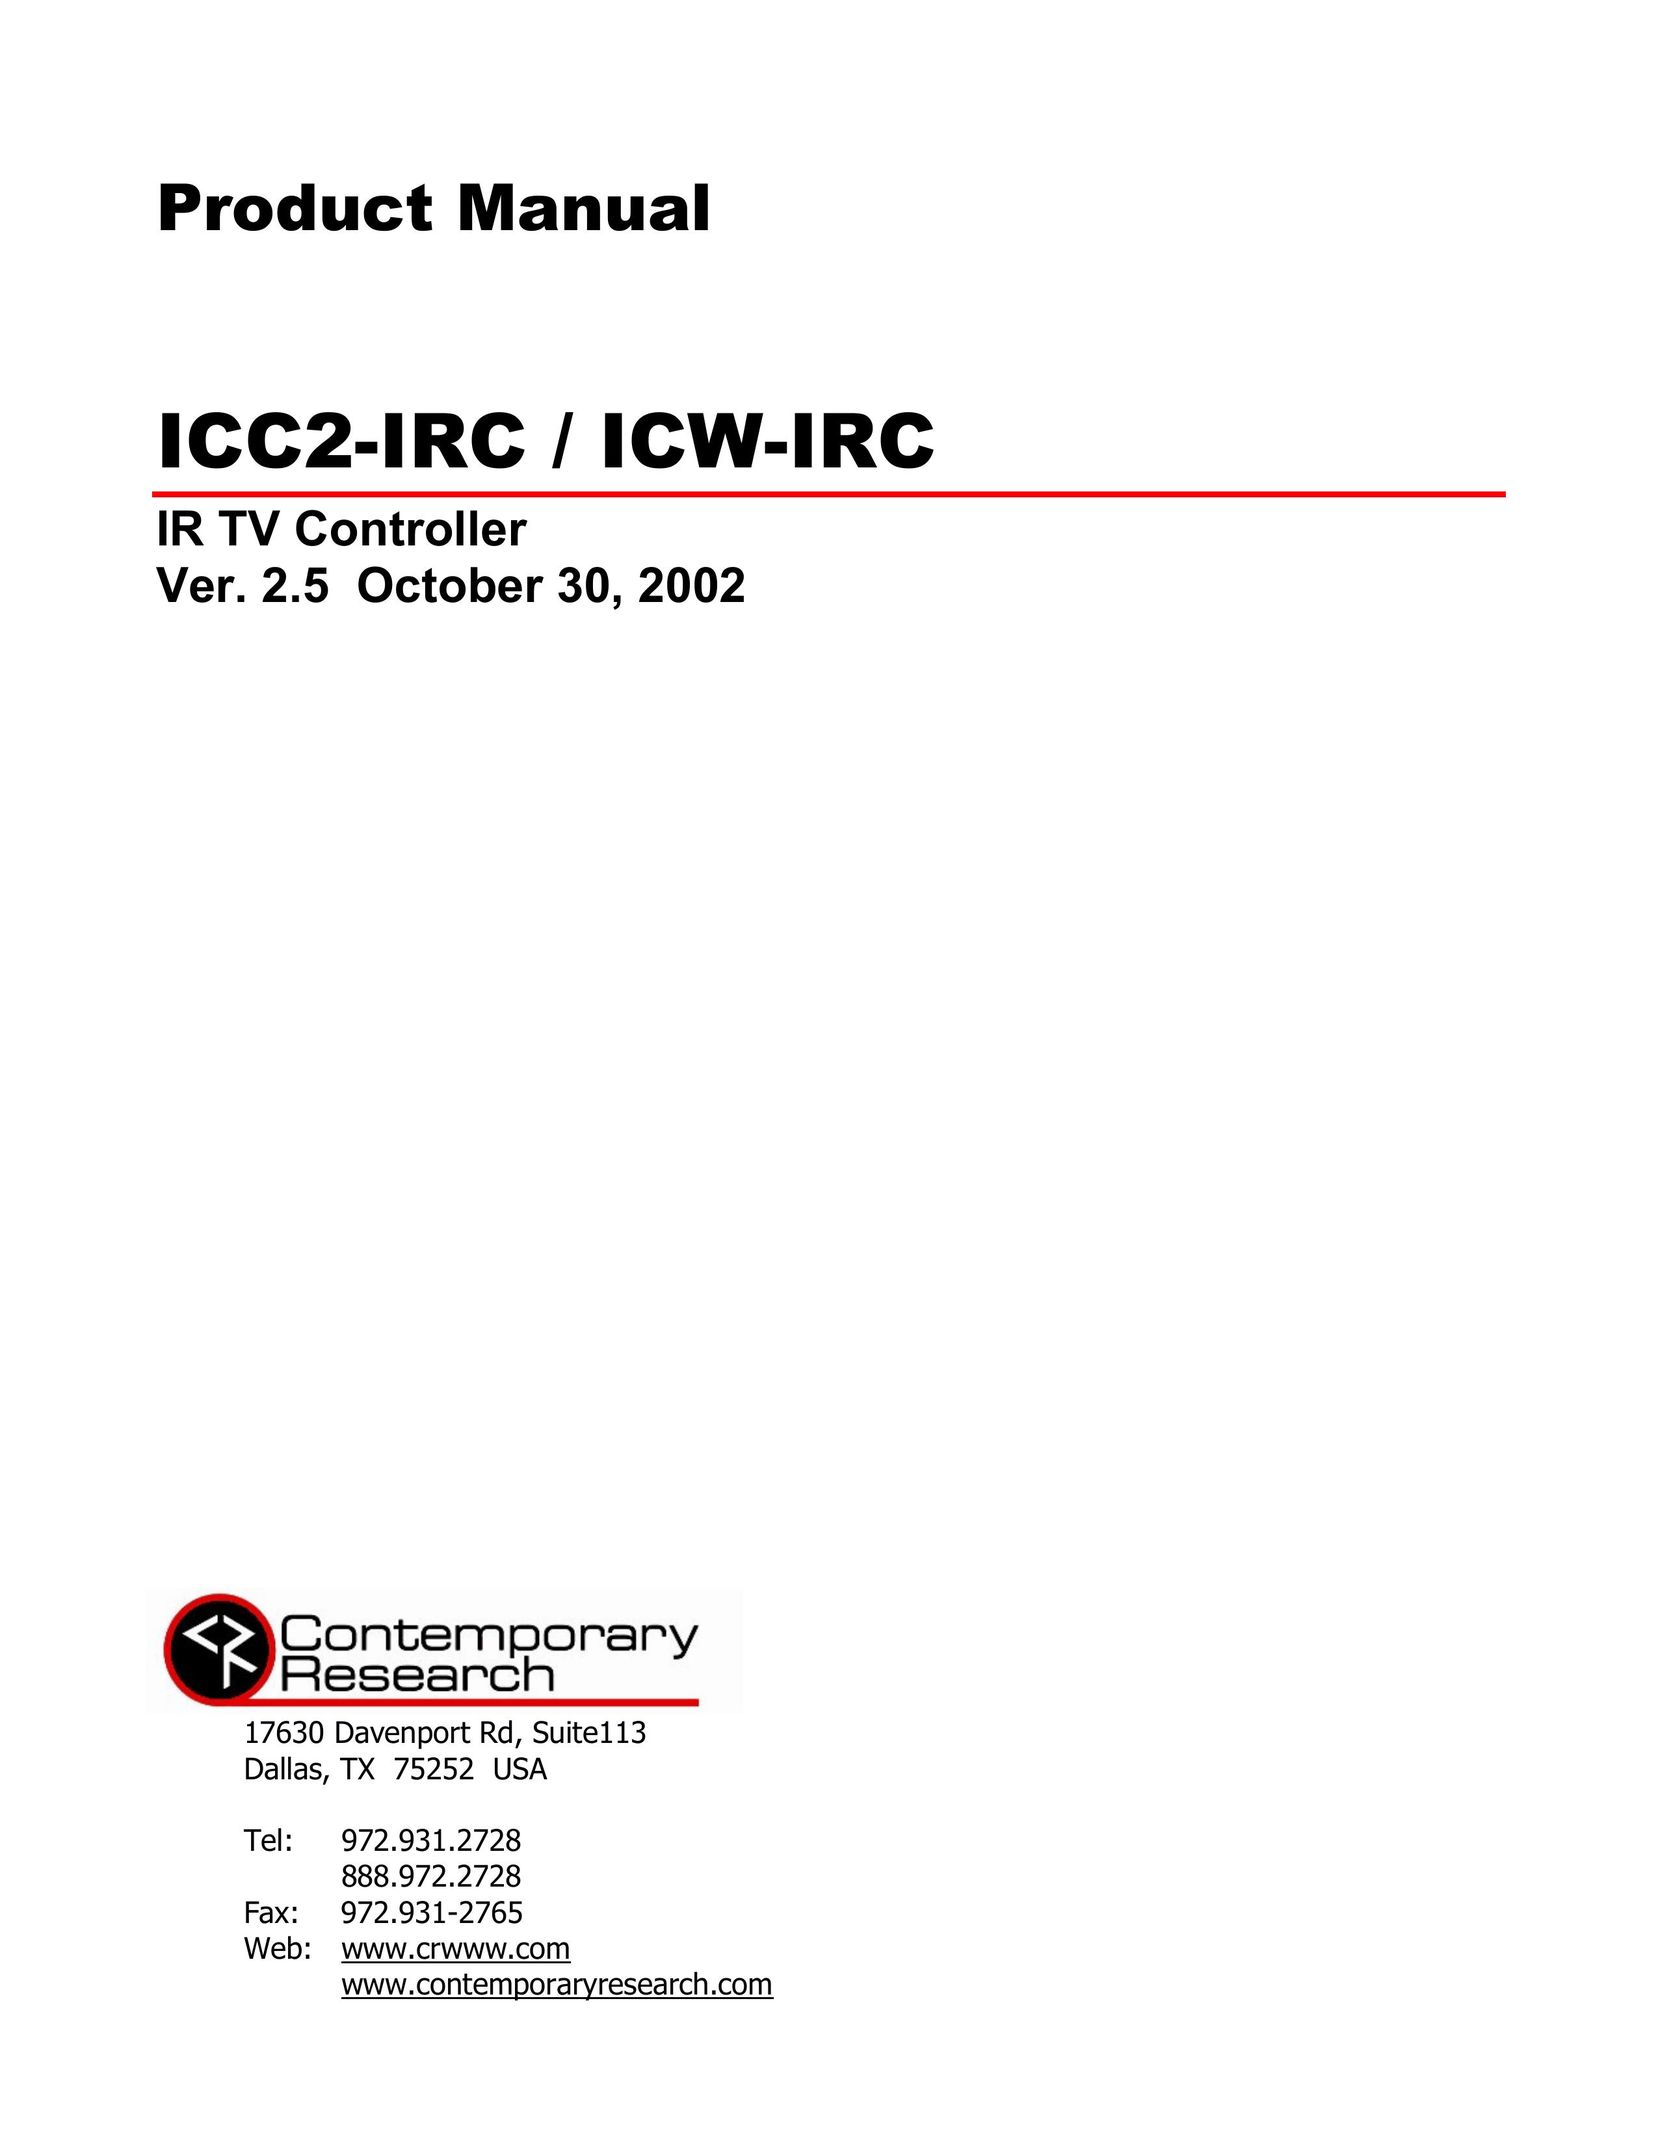 Contemporary Research ICW-IRC Universal Remote User Manual